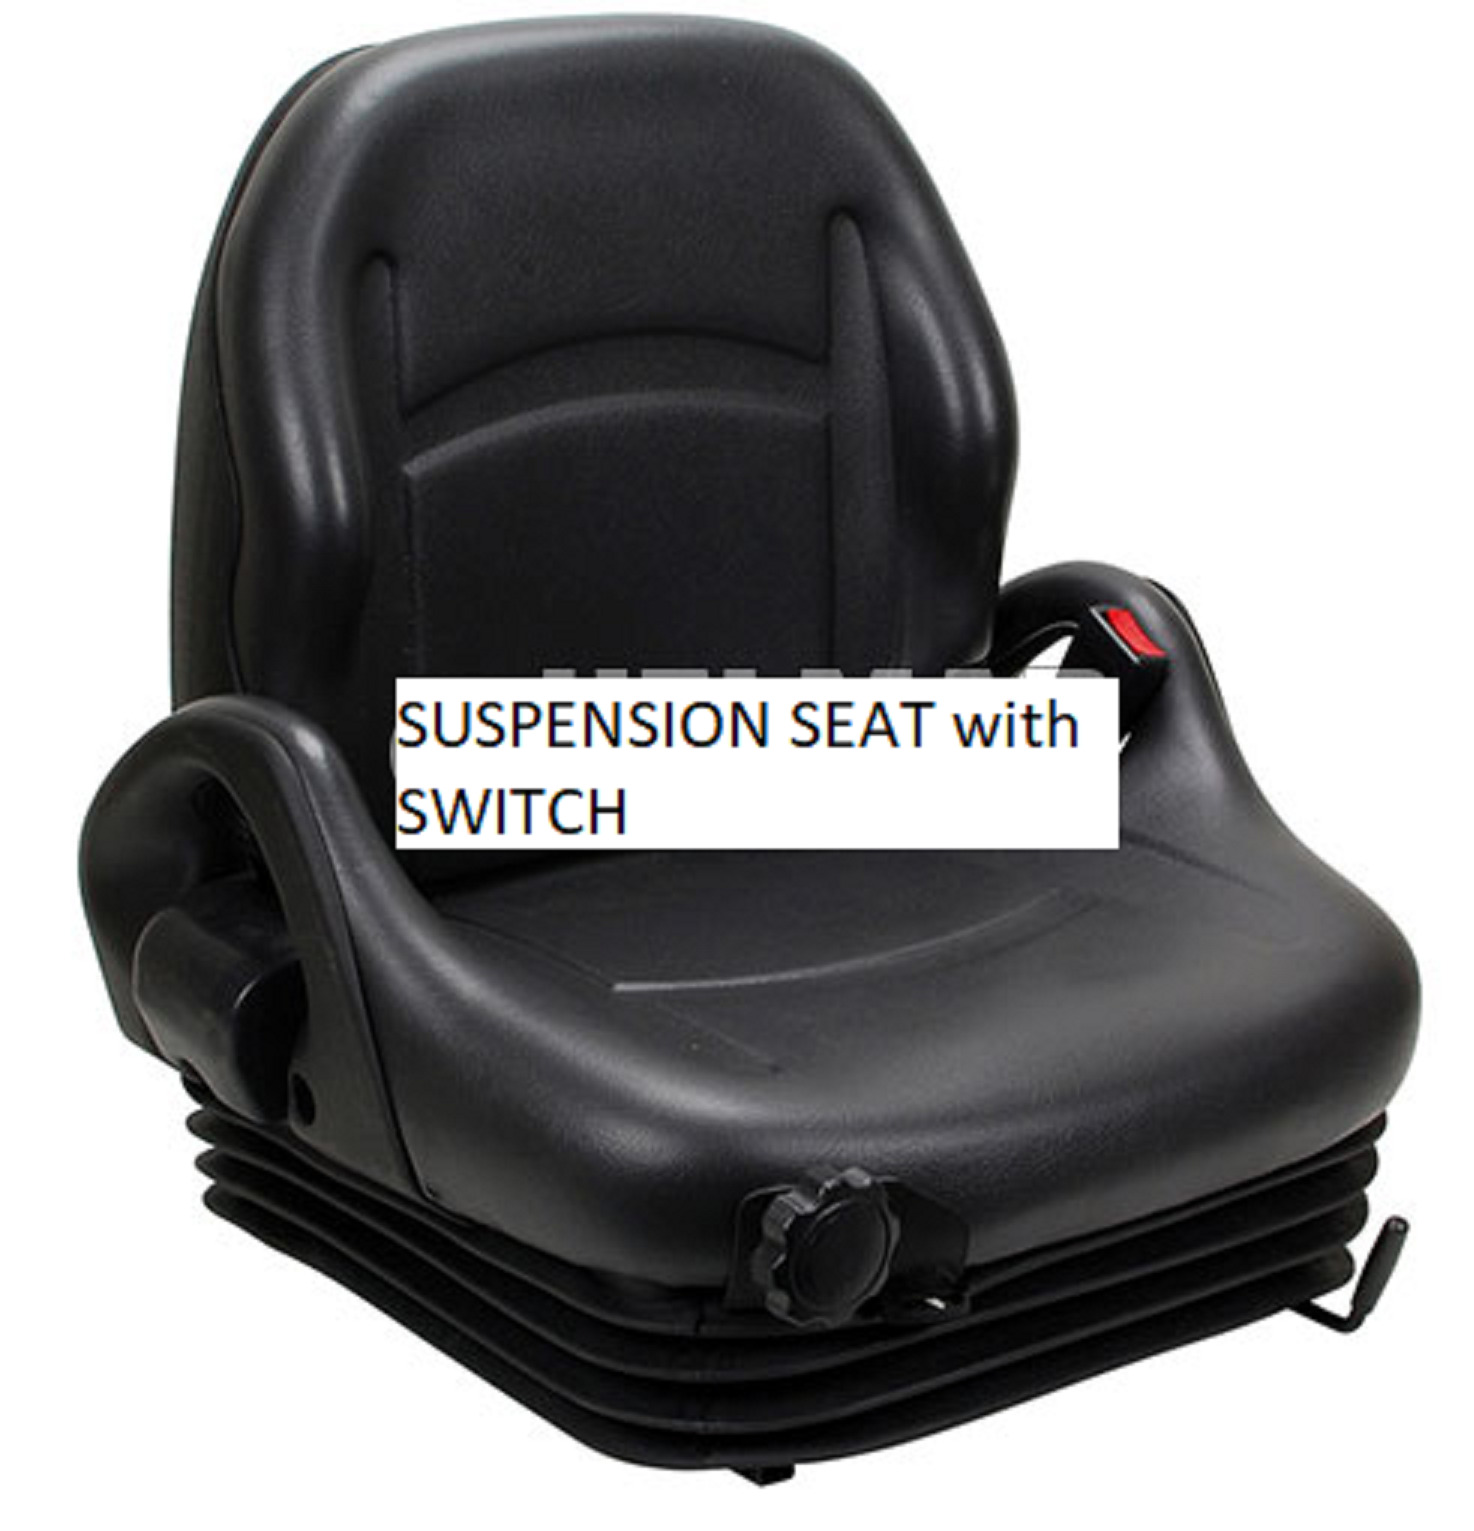 CATERPILLAR MITSUBISHI SUSPENSION MOLDED SEAT WITH SWITCH SEAT BELT